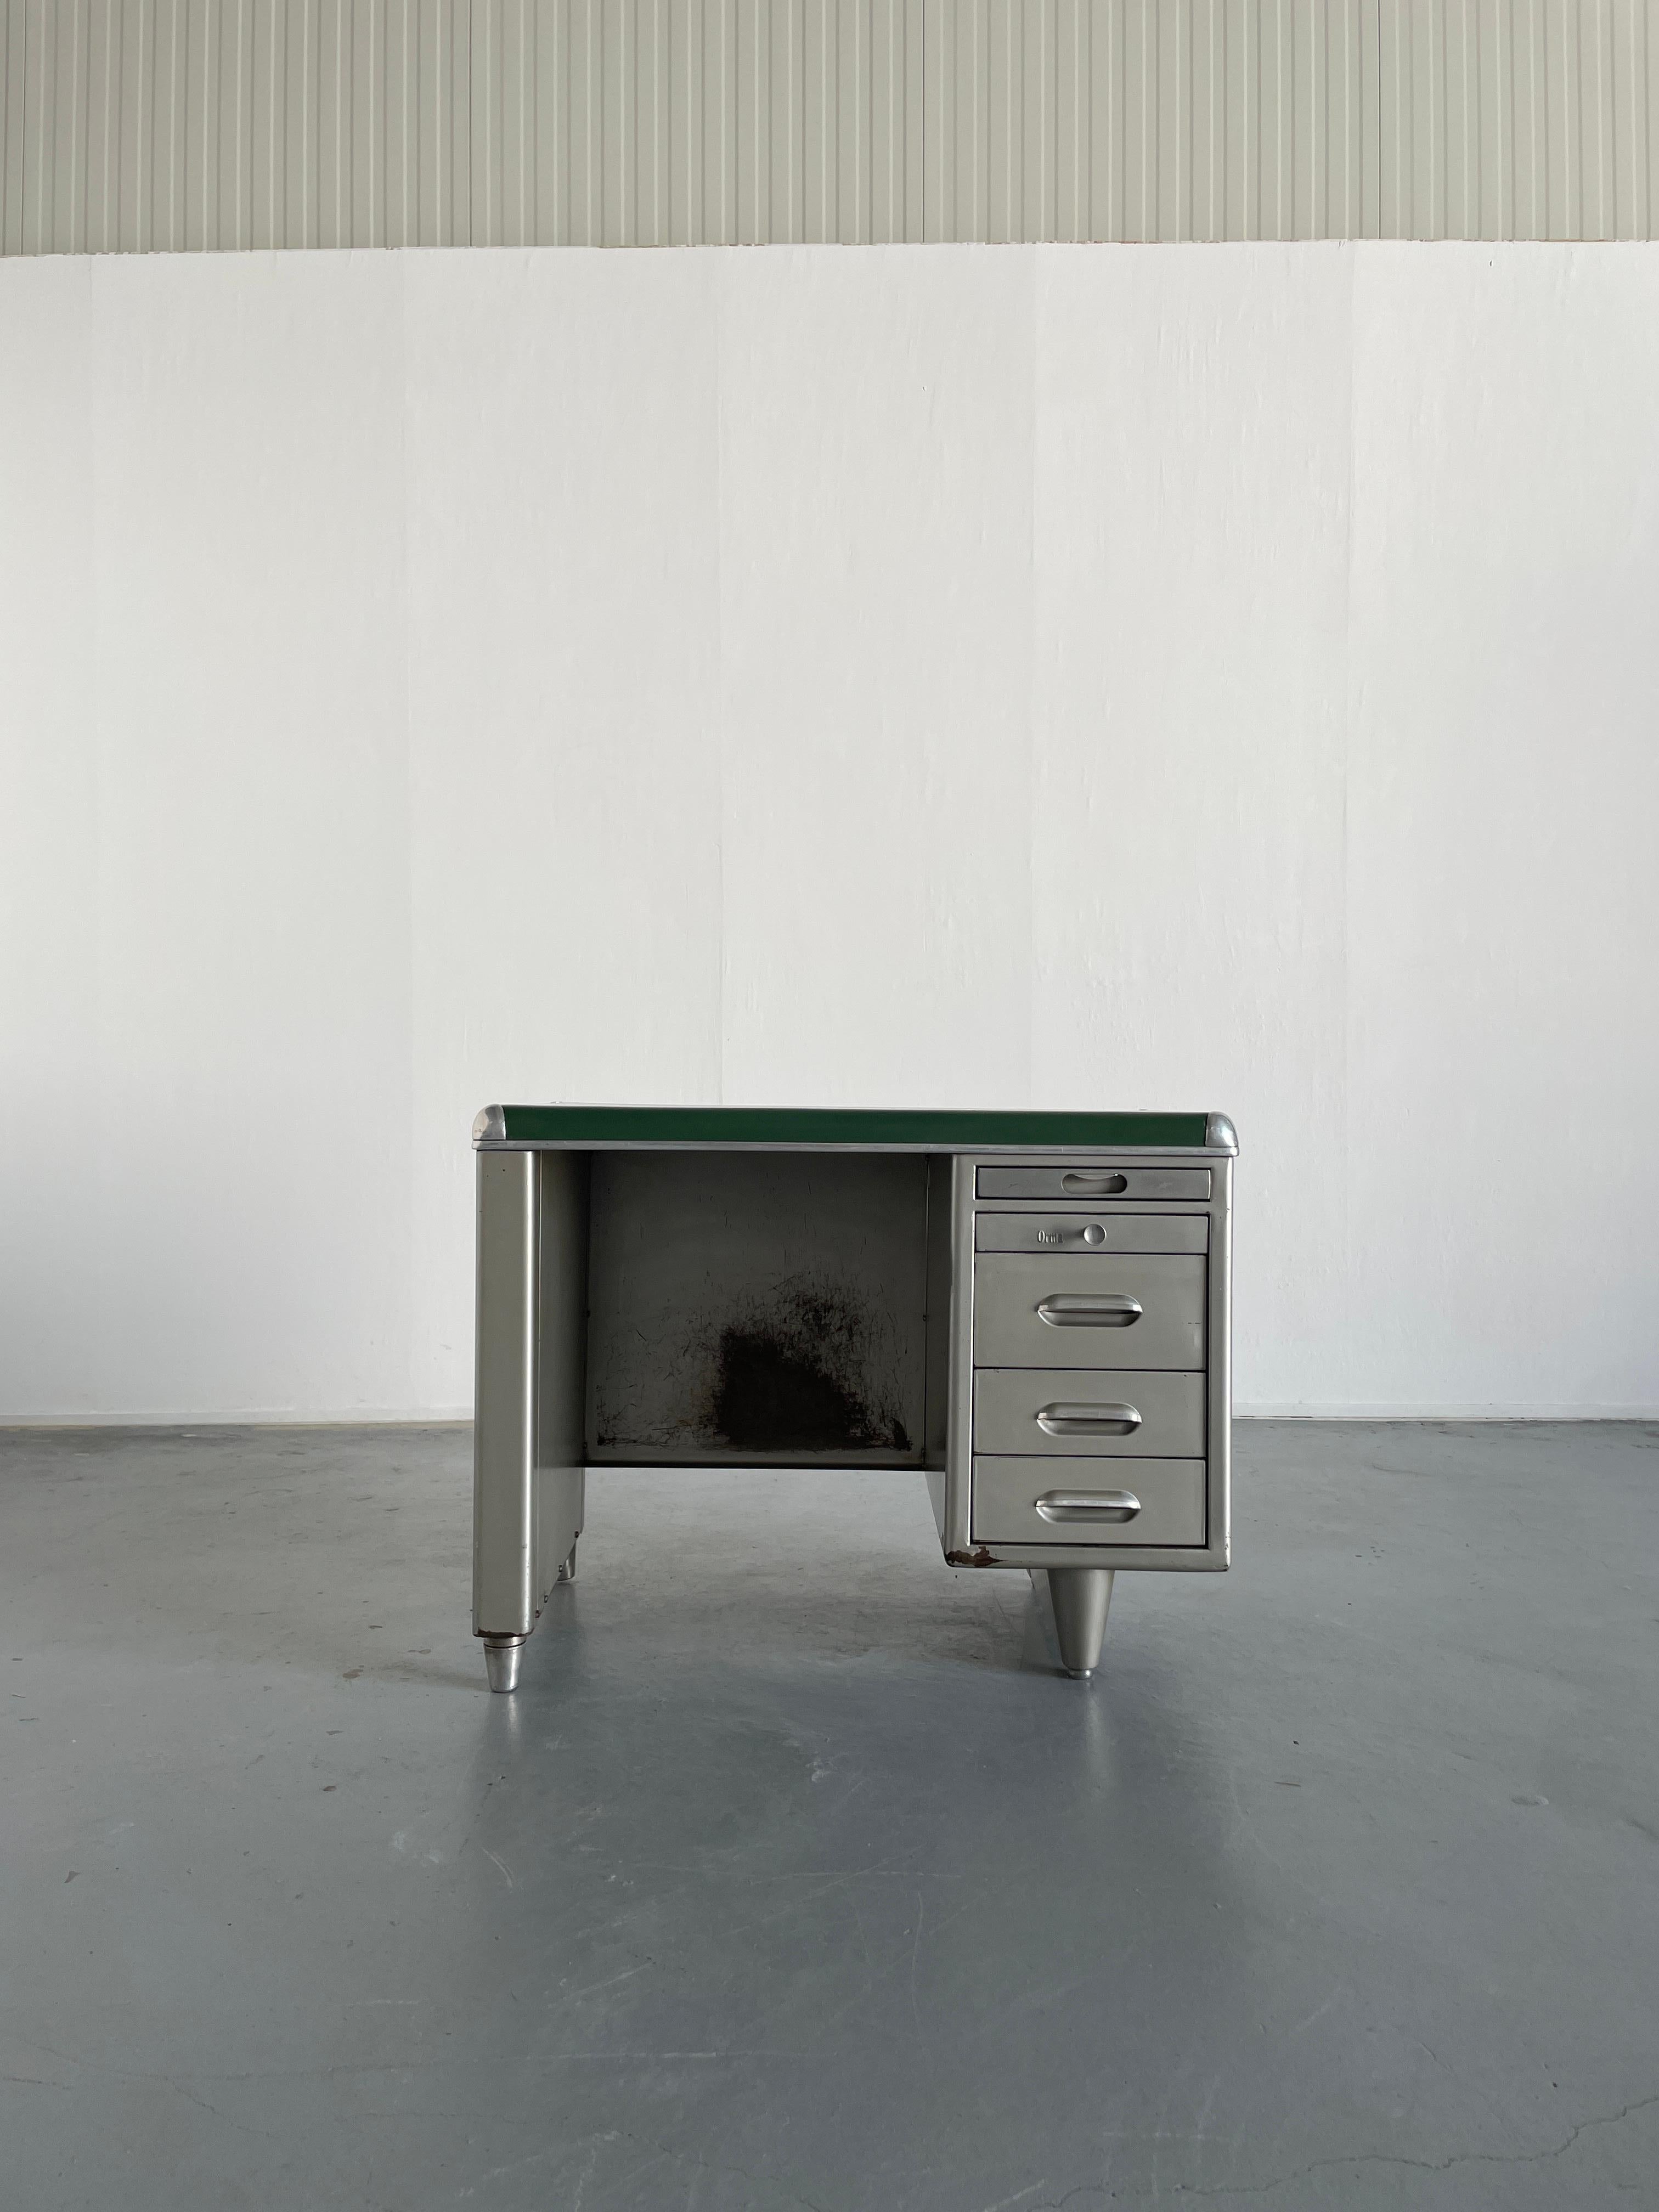 A unique small 1950s industrial design single bank steel tanker desk with green top, produced by Orma Milano from Italy.
Features four drawers of different sizes, and a fifth top drawer that can be used as an additional working space.
Labeled.

In